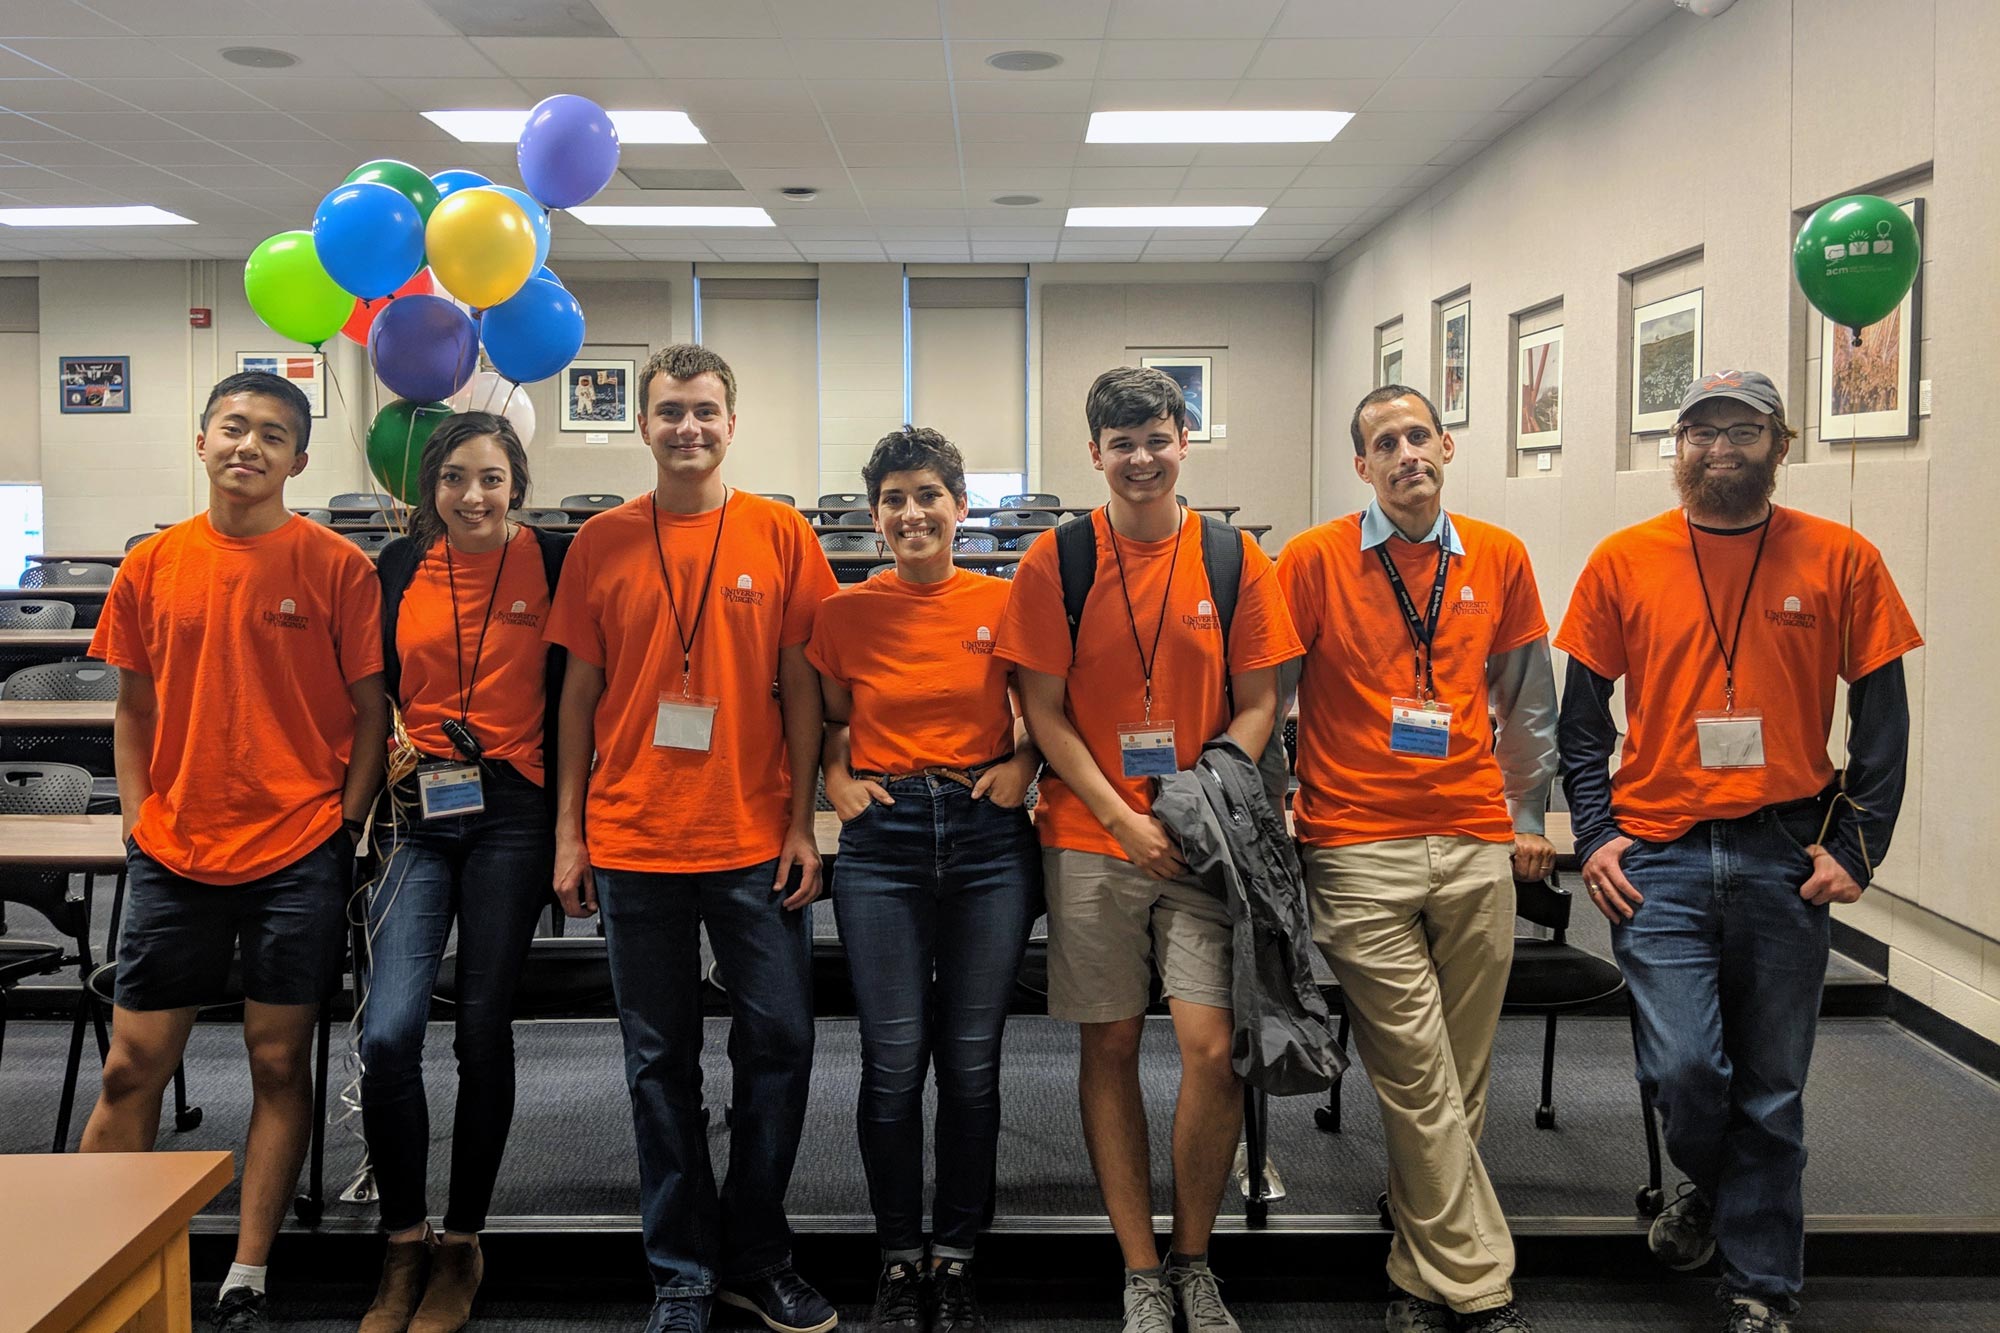 Group photo of seven people wearing orange shirts and name-tags in a large conference room